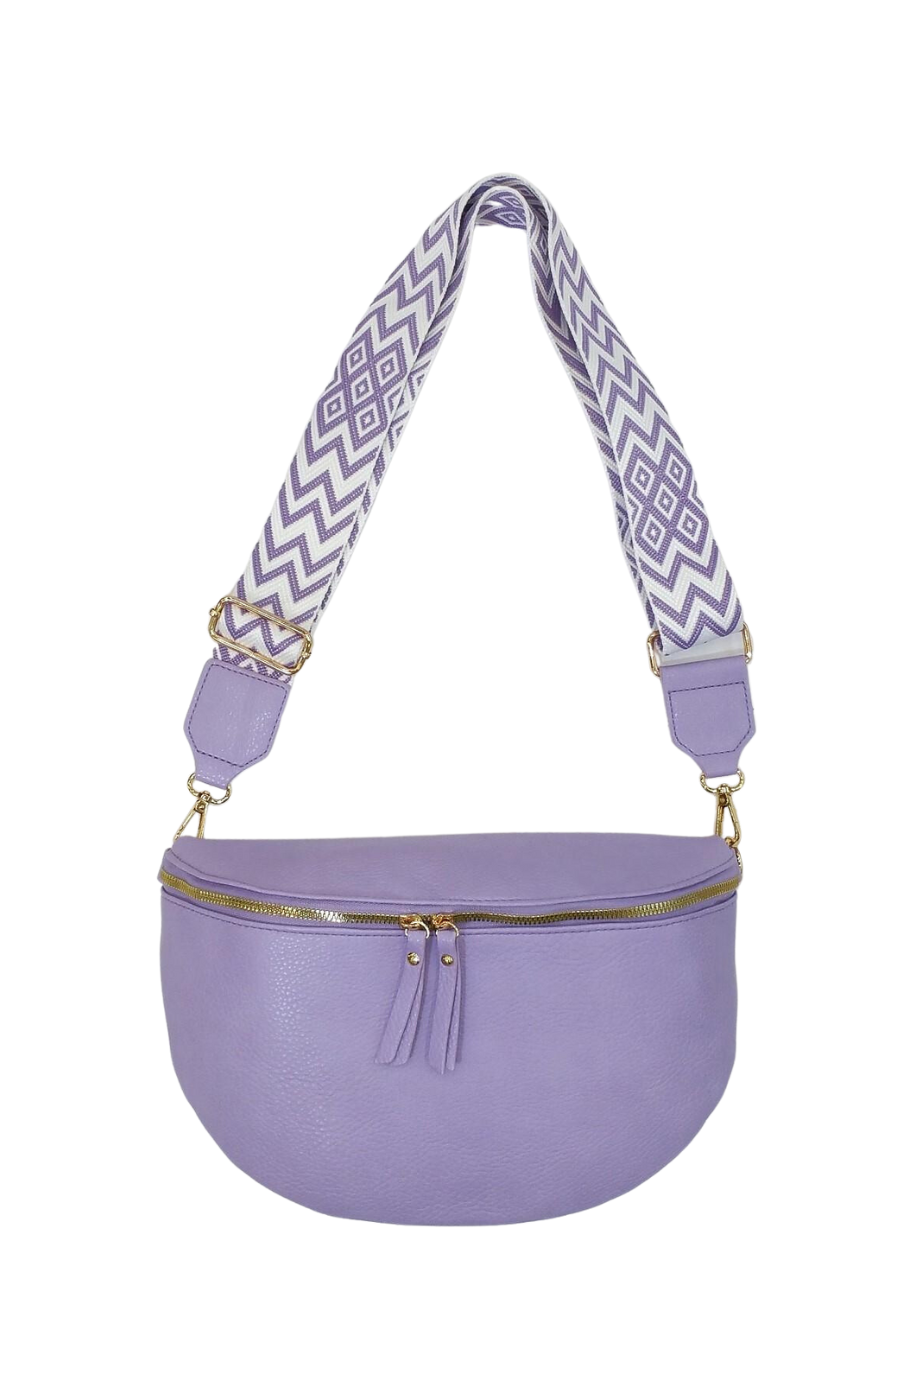 Naoise Cross Body Bag in Lilac